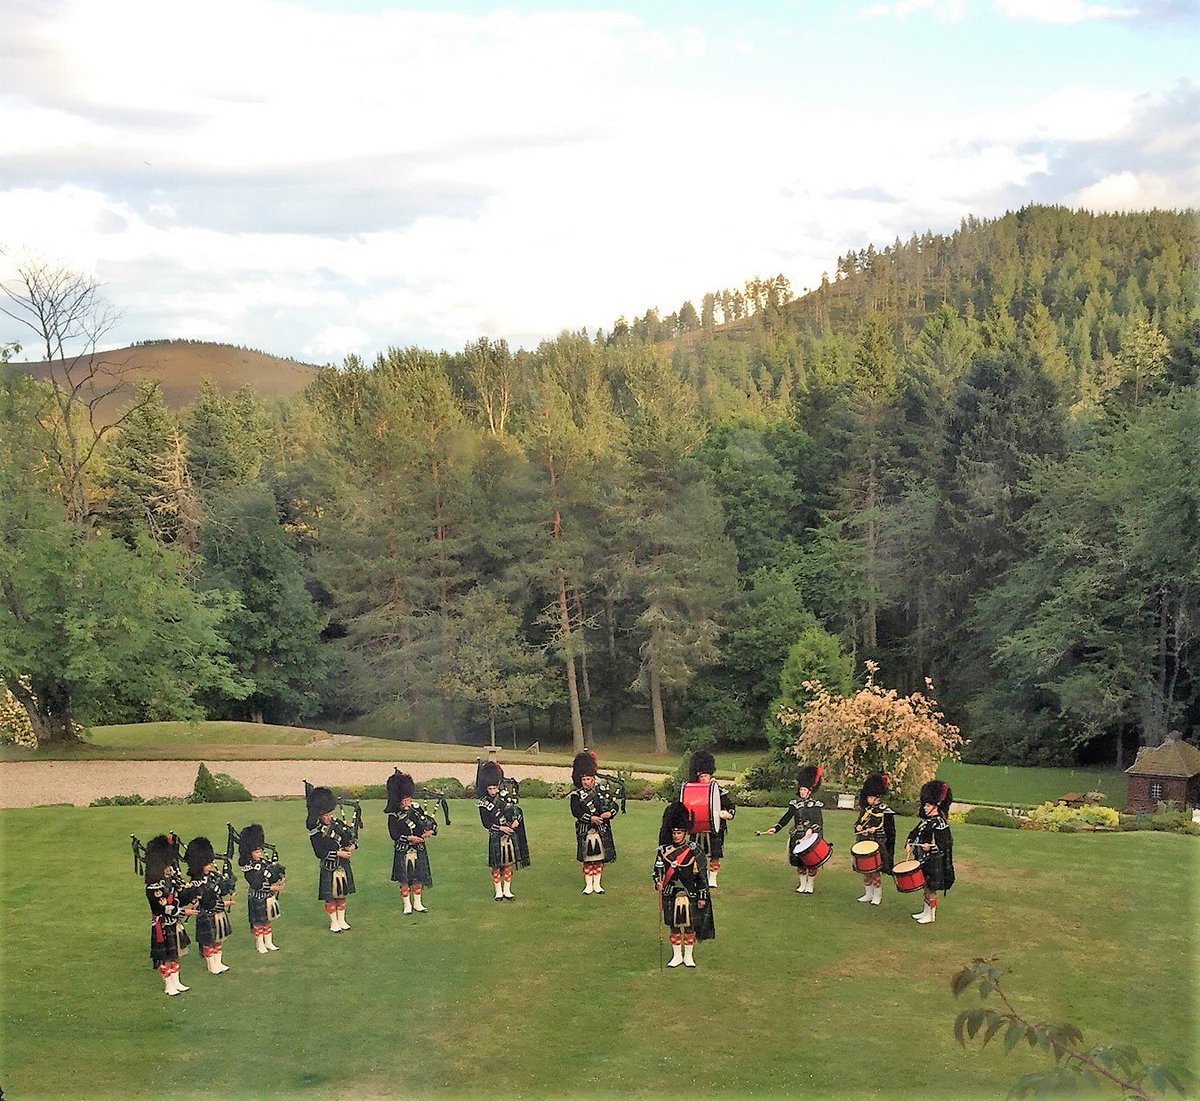 Our guests last week got to enjoy a wee visit from some of the Lonach Pipe Band. Just over three weeks and Candacraig will be welcoming The Lonach March #candacraig #exclusiveusevenue #LonachPipeBand #visitabdn #VisitScotland #LonachGathering #HighlandGames